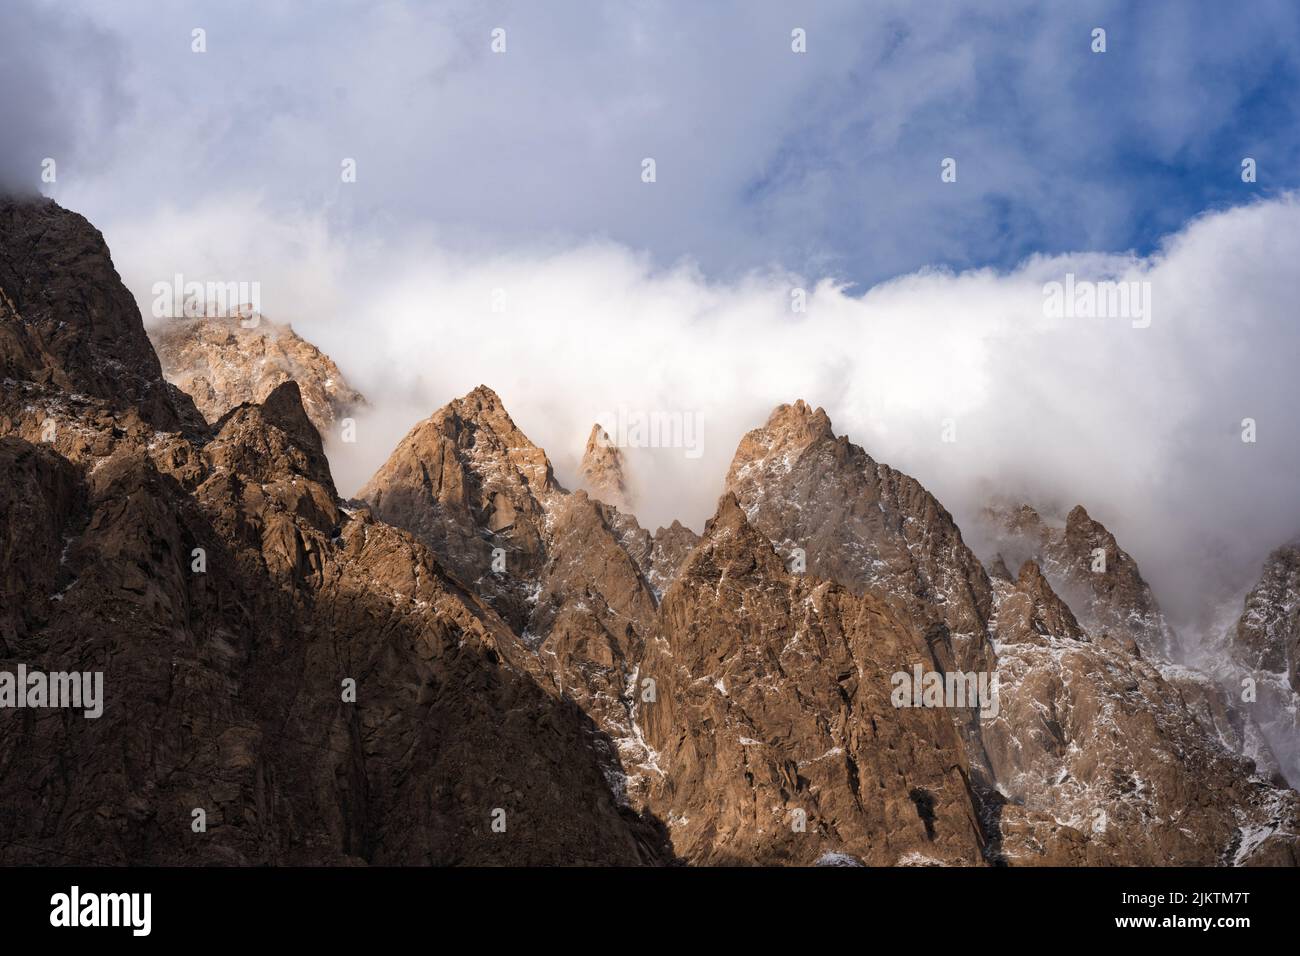 The beautiful view of the mountain peaks against the sky. Stock Photo